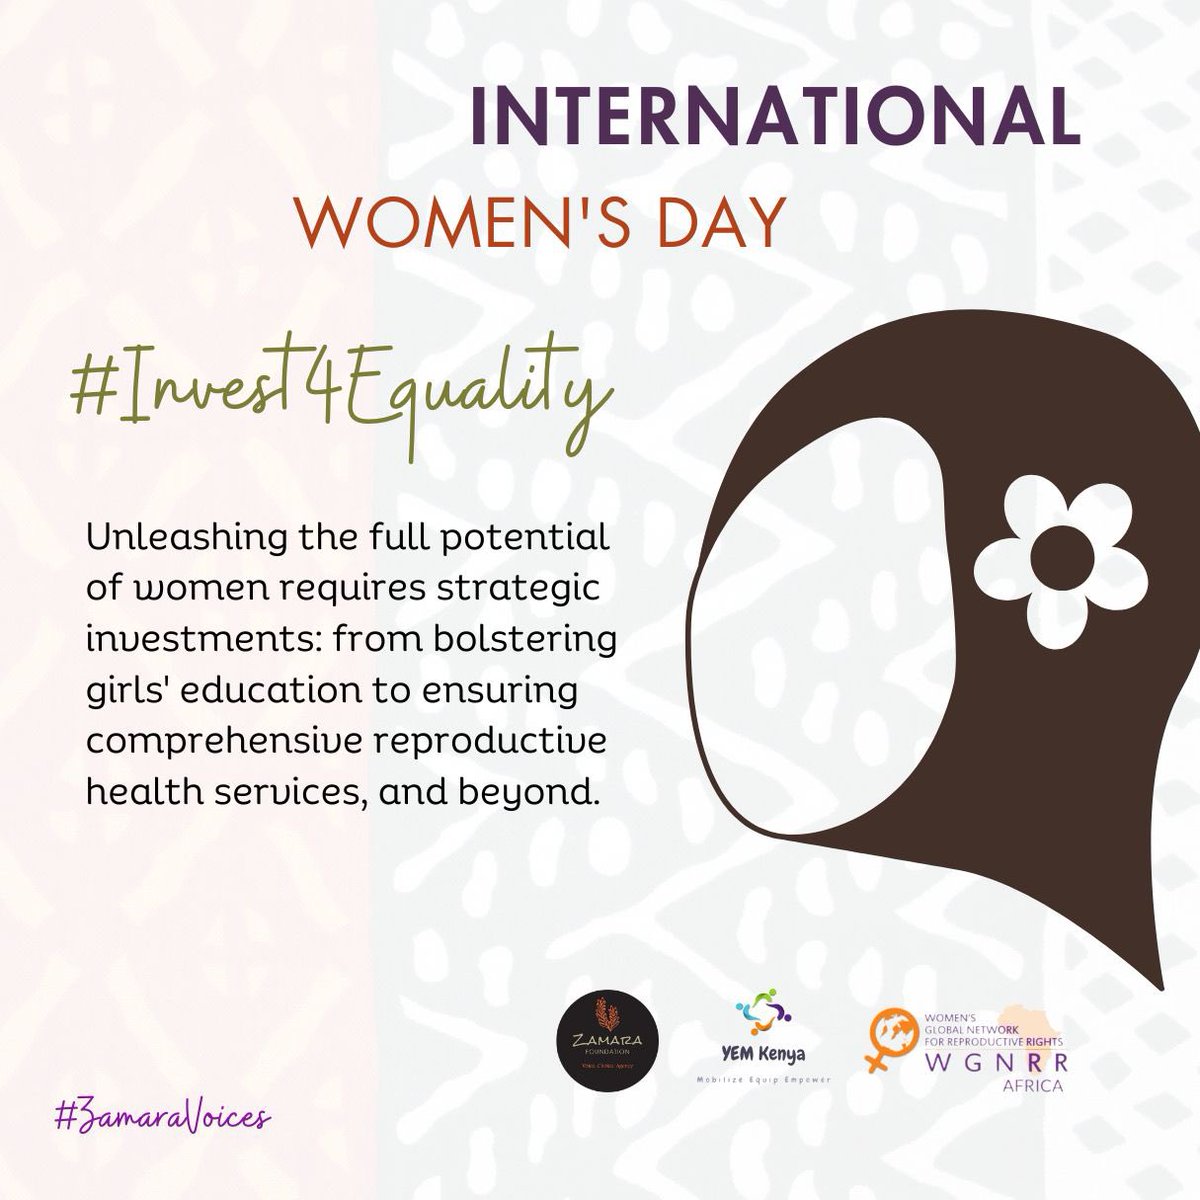 Ensuring representations and active participation of women in decision making processes at all levels #Invest4Equality 
#ZamaraVoices 
@Zamara_fdn
@YEMKenya
@wgnrr_africa